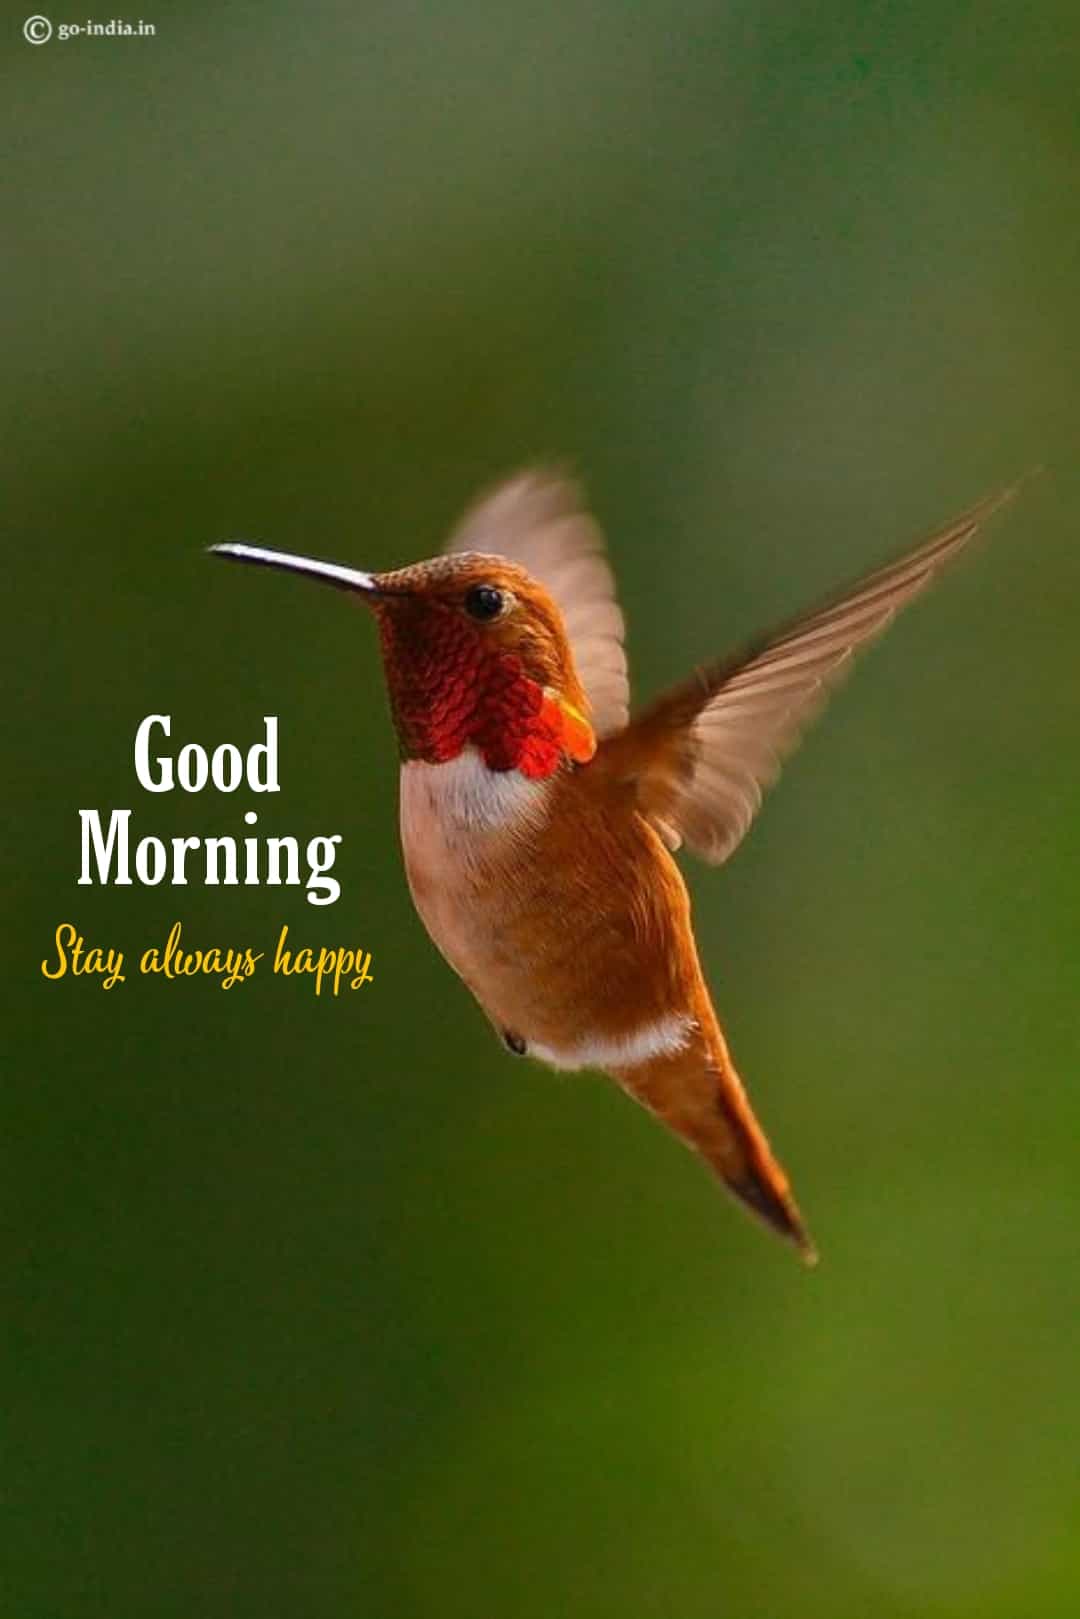 70+ Beautiful Good Moring Images with Birds [ Latest Update ]